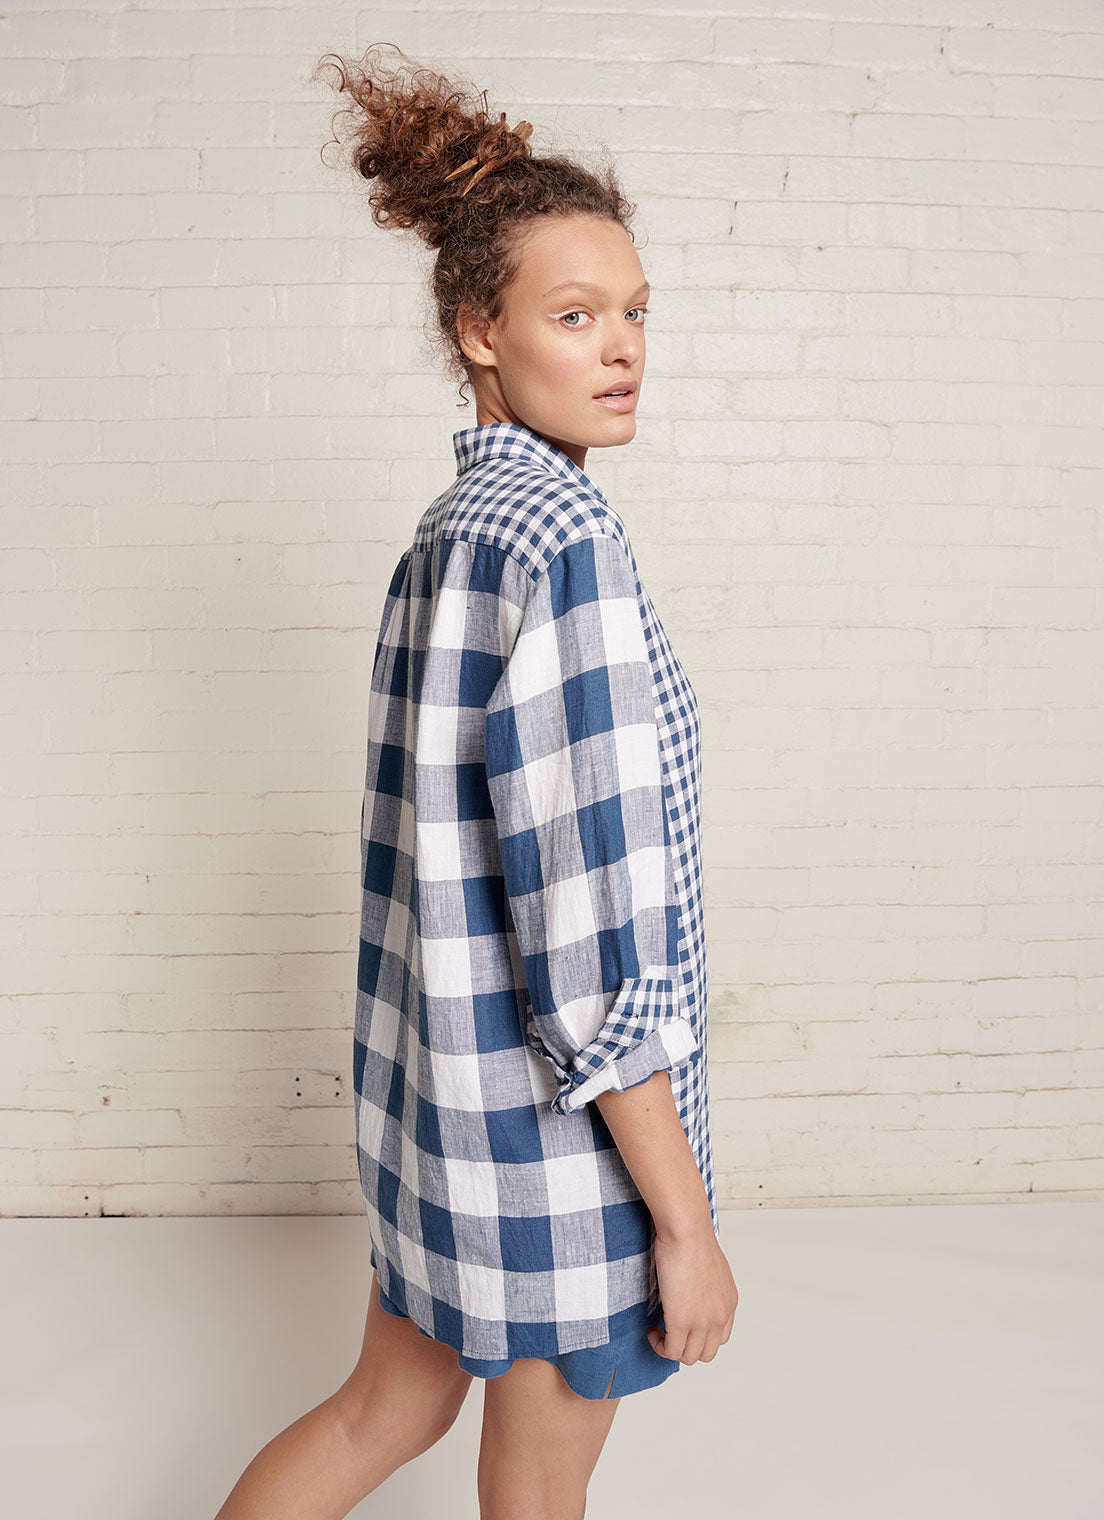 An indigo and white gingham, relaxed fit, unisex shirt with collar, sleeve cuff and centre front button fastening made from mixed gingham yarn dye washed linen